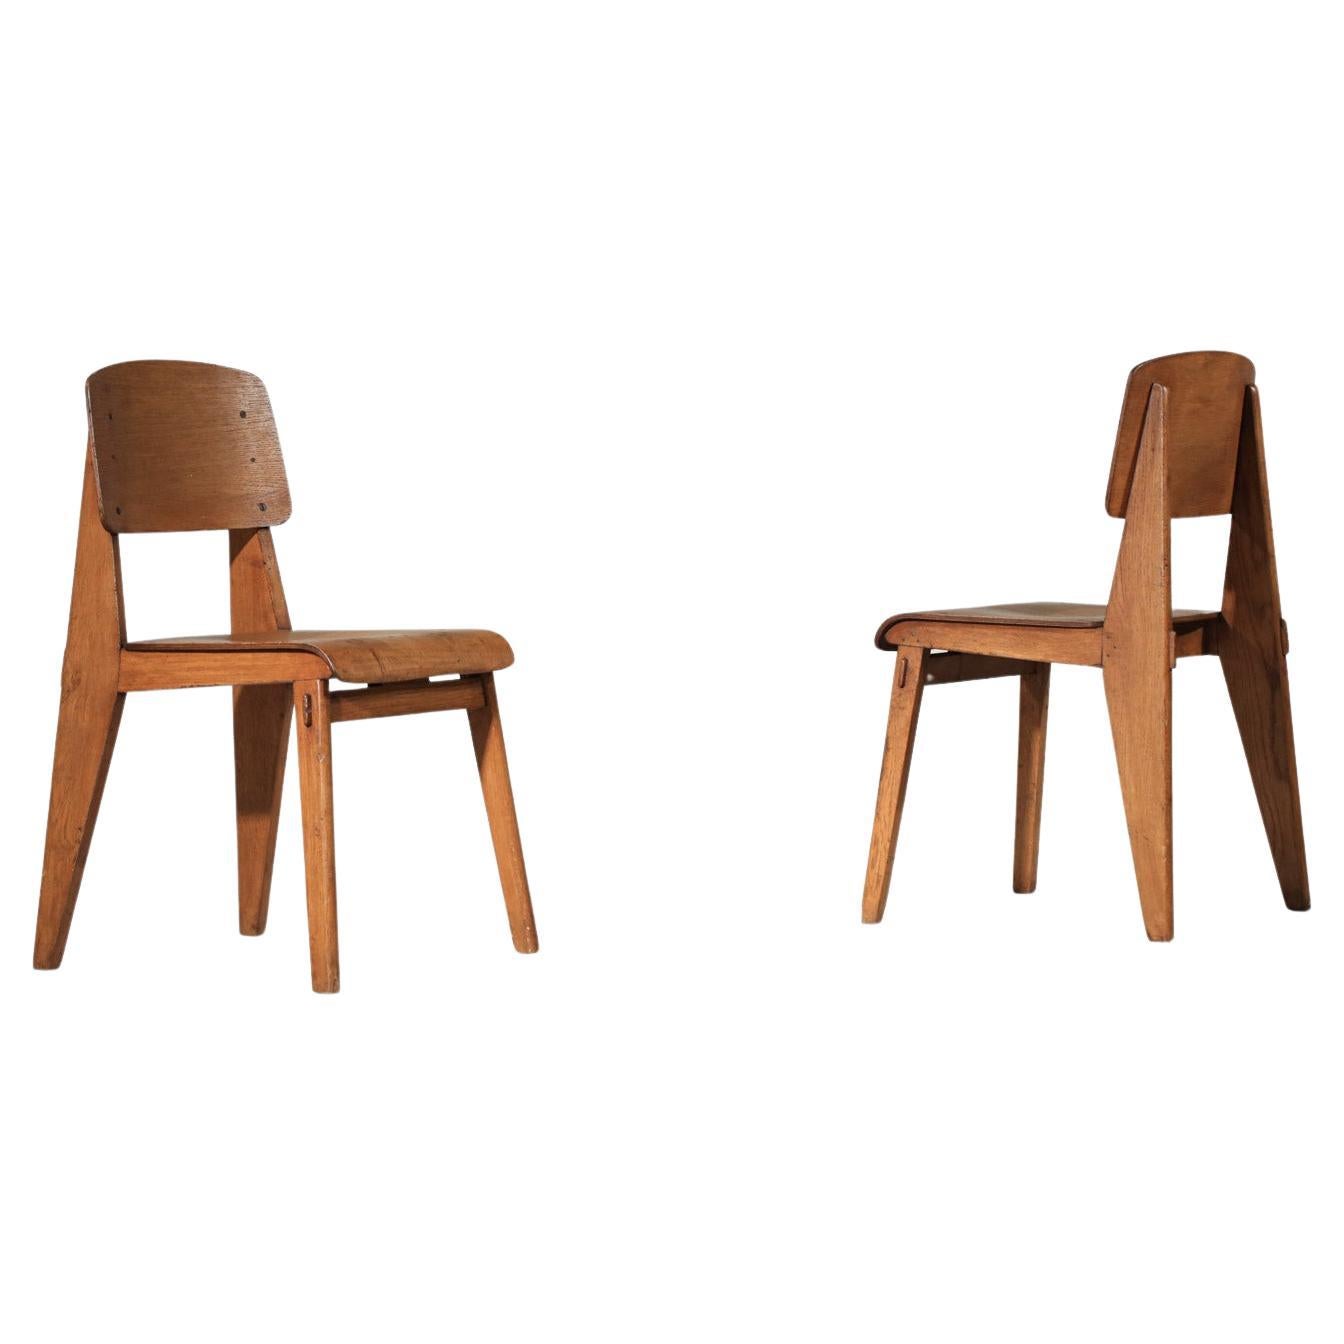 rare Pair of Jean Prouvé all-wood chairs 1950's French design  For Sale